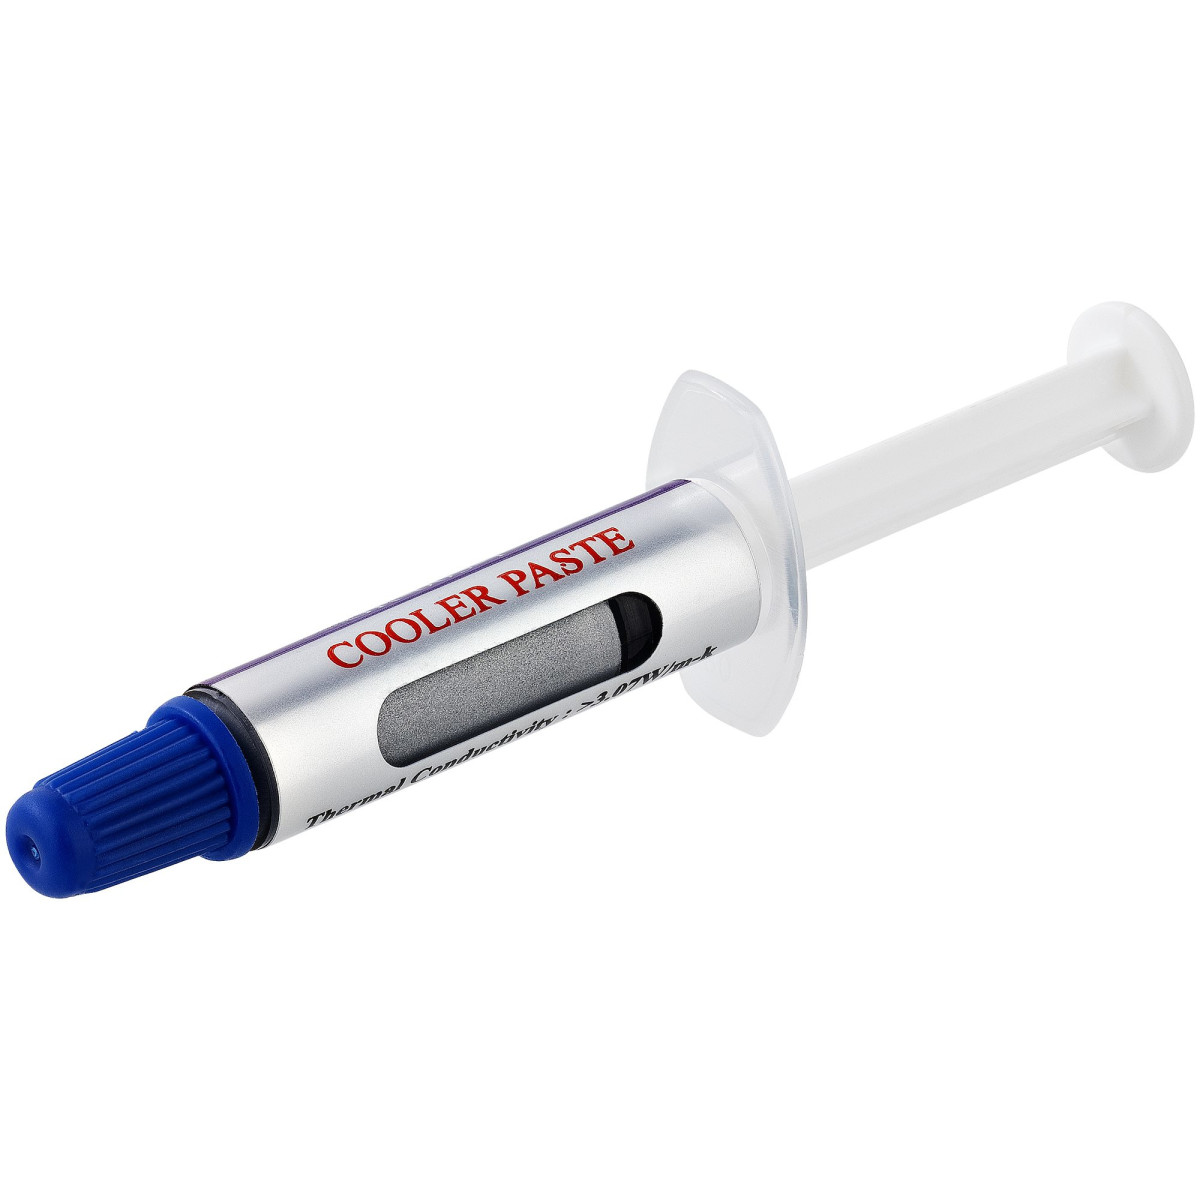 Metal Oxide Thermal CPU Paste Compound